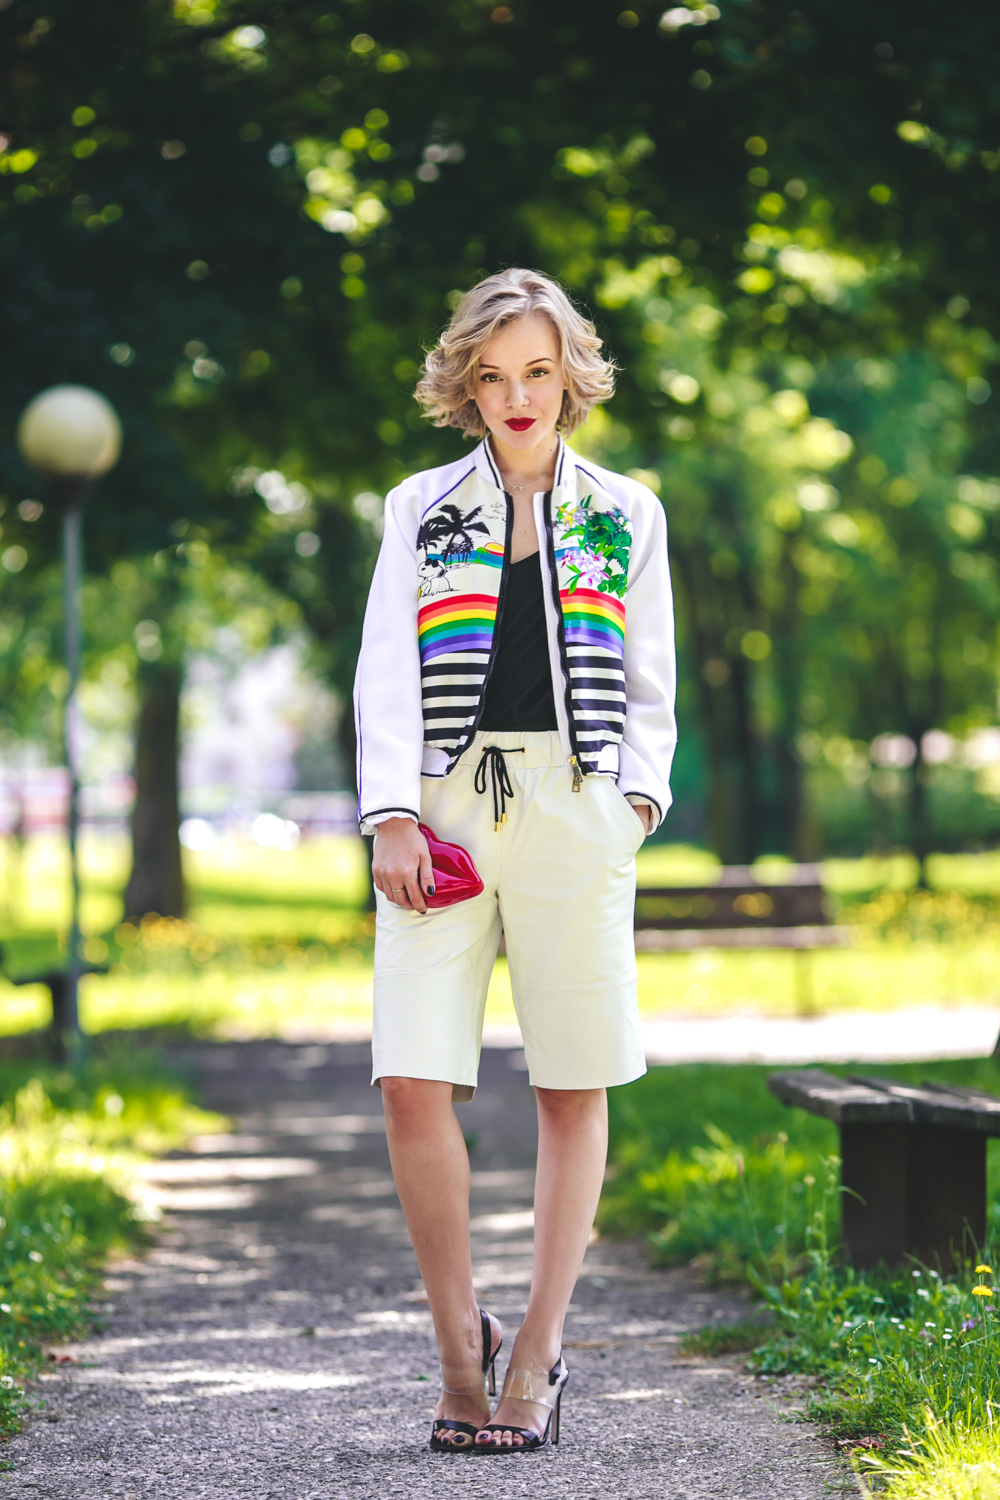 darya kamalova fashion blogger from thecablook is wearing fay snoopy jacket asos white leather shorts cami black top lips vintage clutch-7532 copy